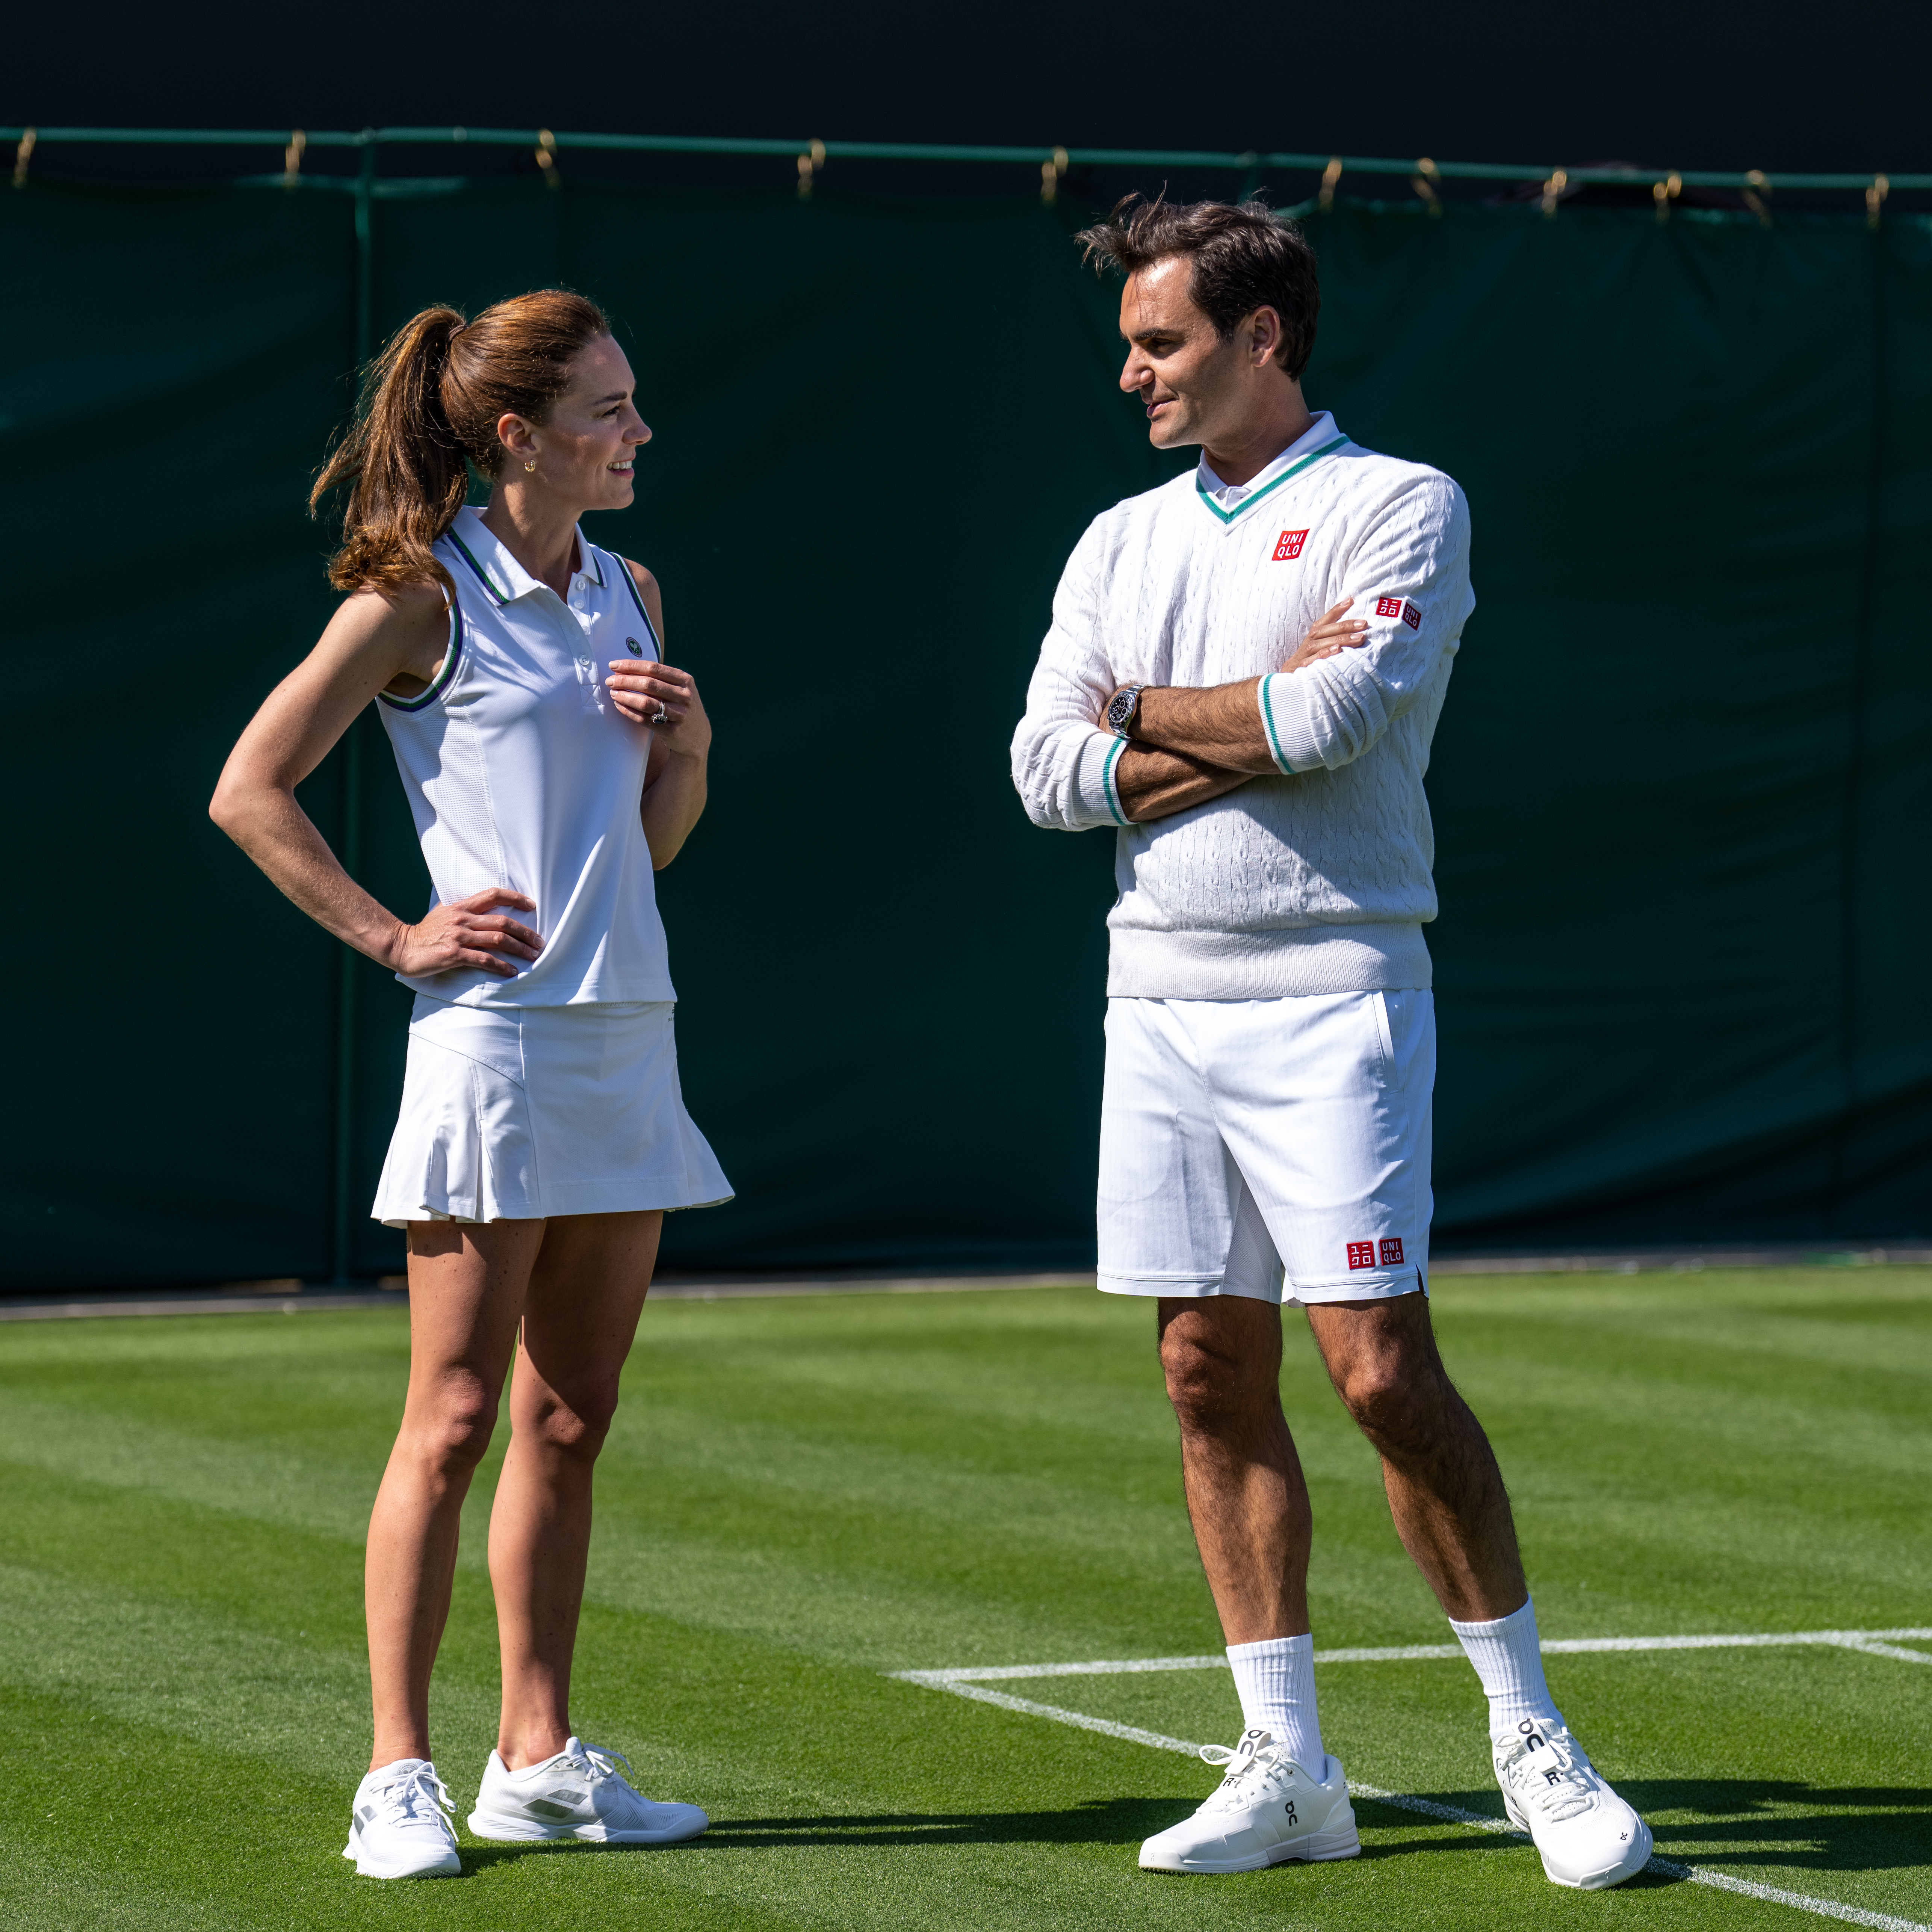 Kate Middleton and Roger Federer at The All England Lawn Tennis Club, Wimbledon, on June 8, 2023 in London, England. | Source: Getty Images